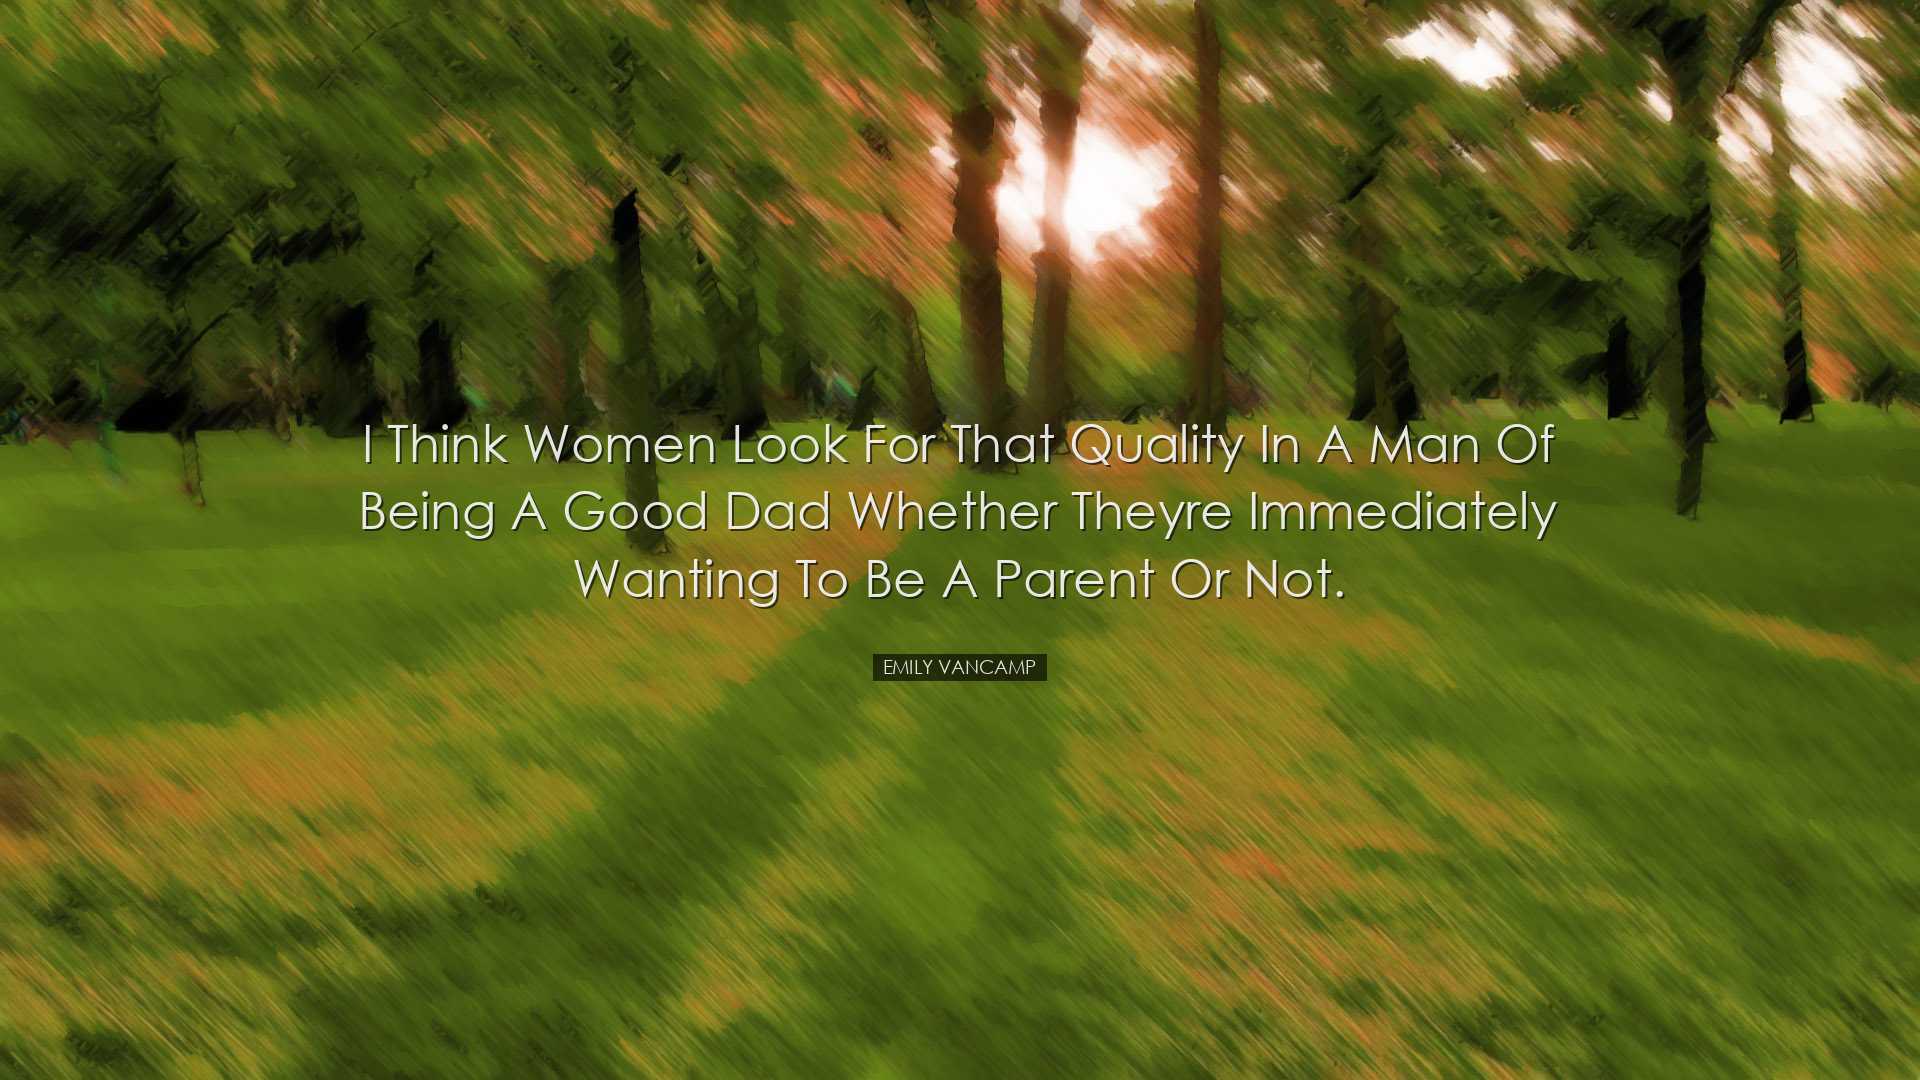 I think women look for that quality in a man of being a good dad w